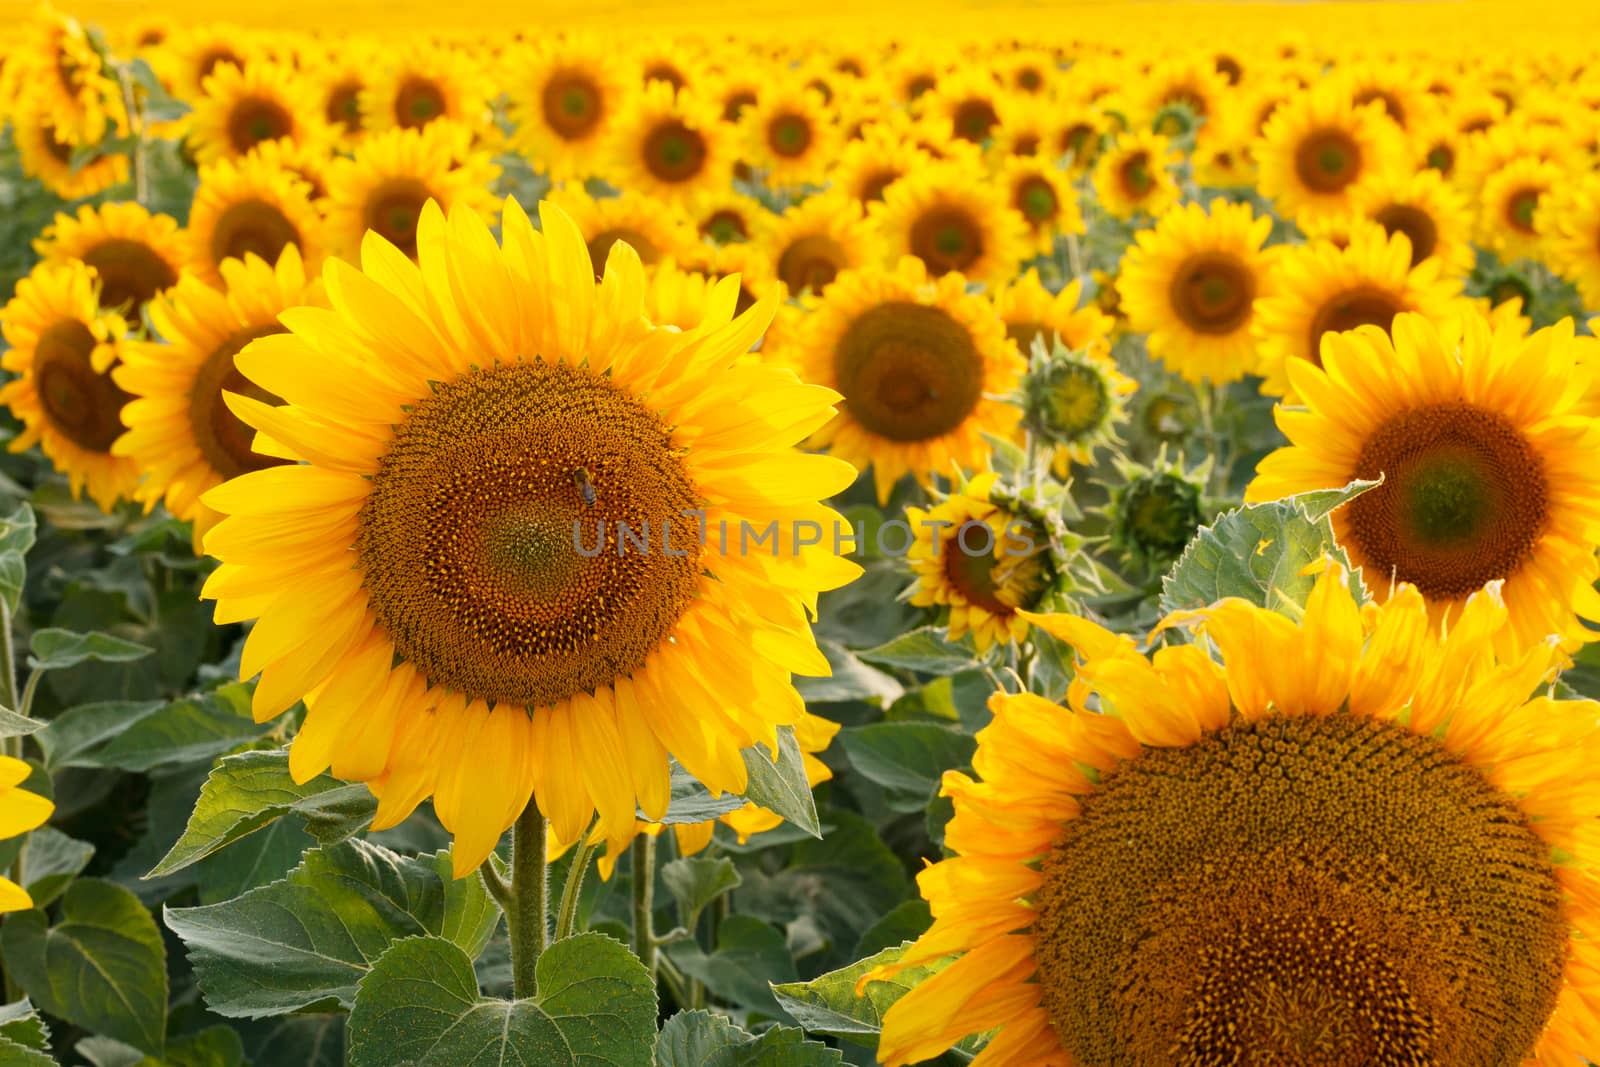 Field of sunflowers backlit. Focus in the foreground